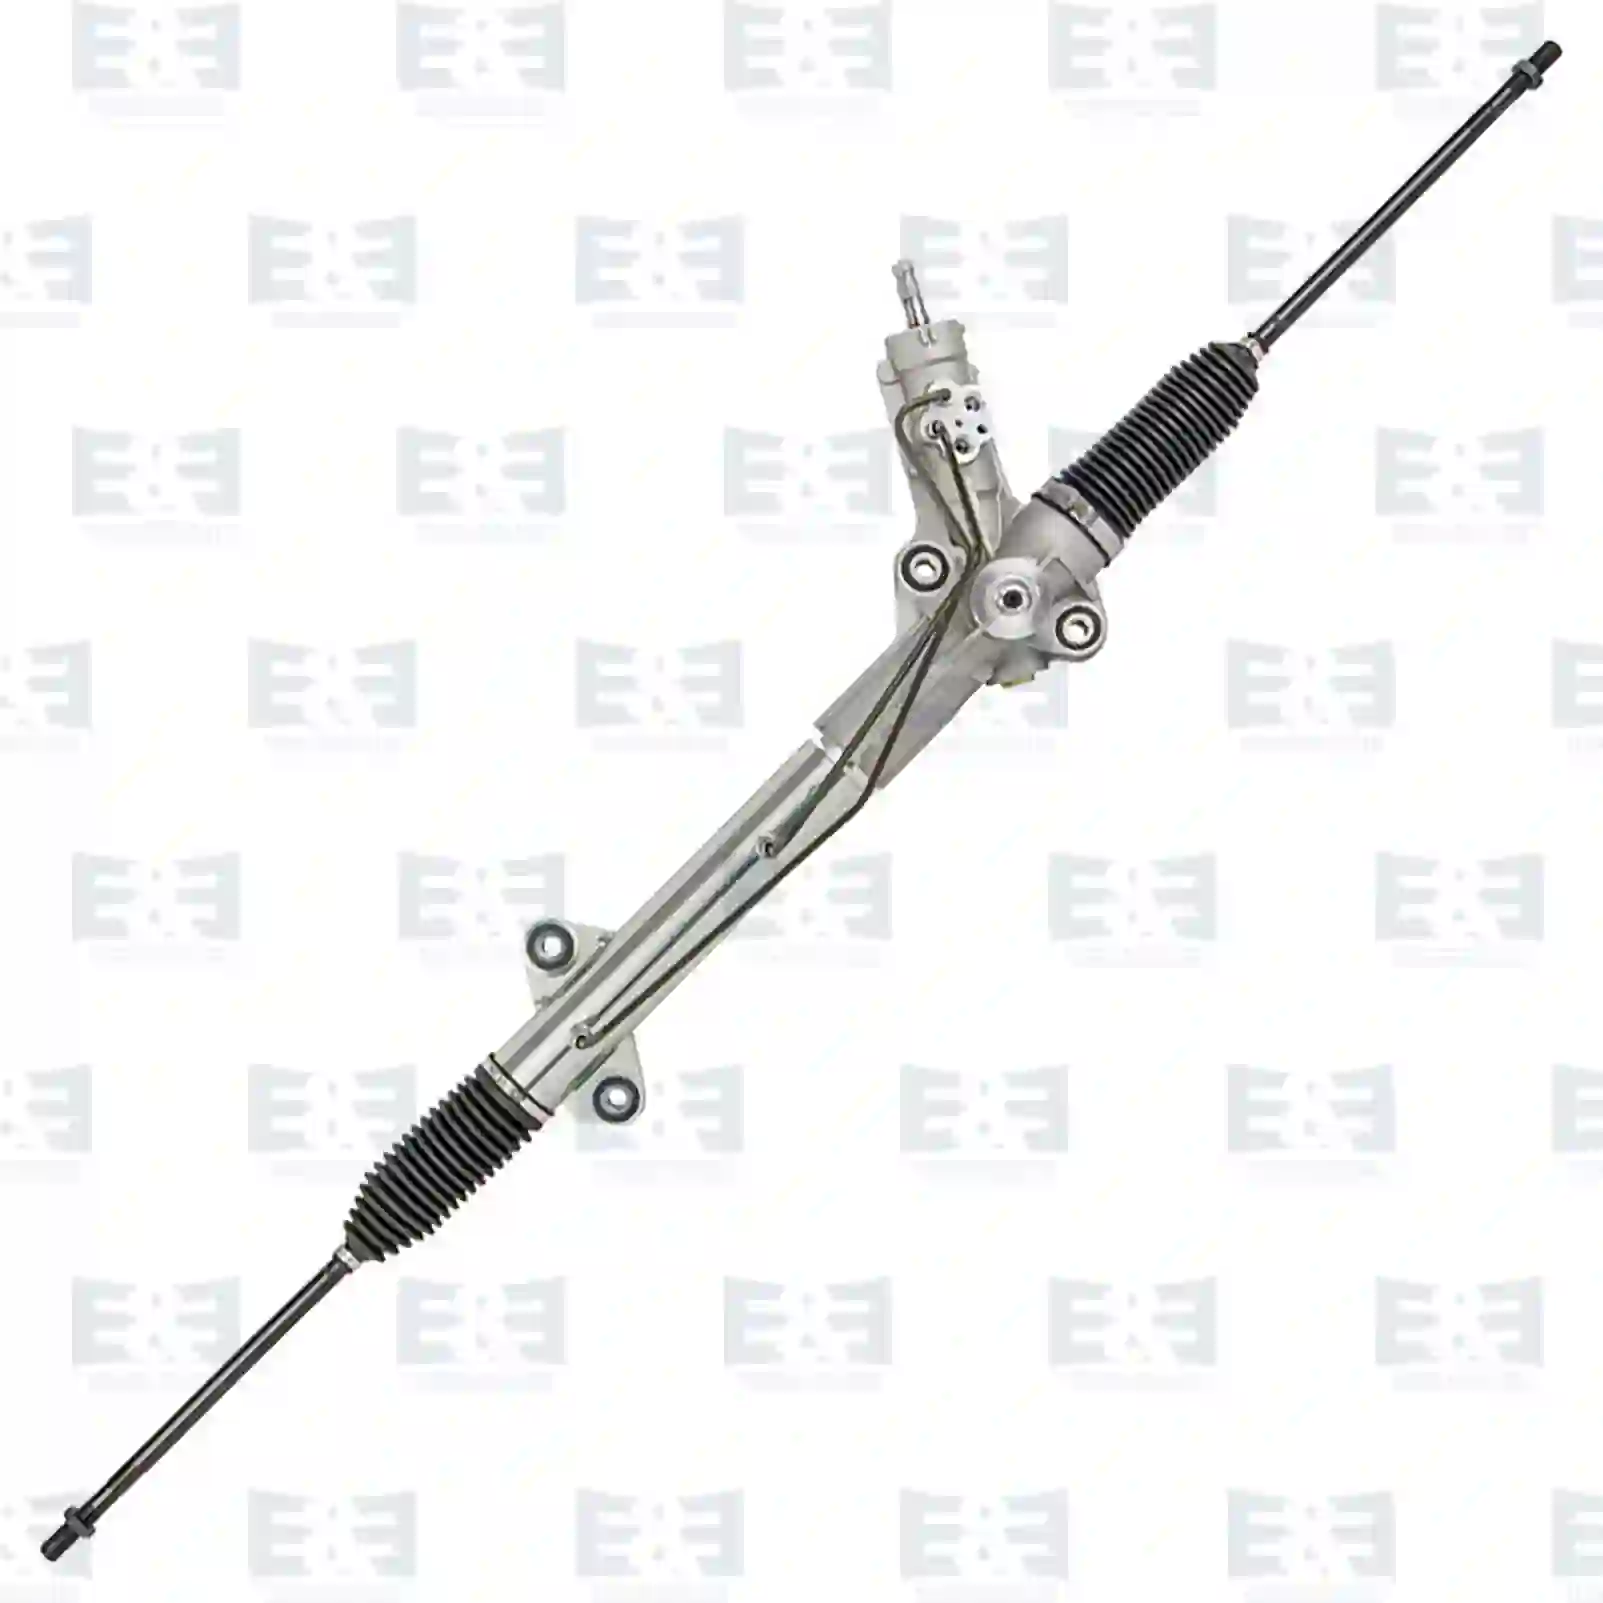 Steering gear, without ball joints, 2E2205623, 68012180AA, 68034032AA, 68048697AA, 9064600200, 906460020080, 9064600400, 9064600600, 9064600800, 9064601300, 9064601500, 9064601700, 2E1419061, 2E1419061A, 2E1419061AX, 2E1419061B, 2E1419061BX, 2E1419061C, 2E1419061CX, 2E1422055A, 2E1422055B, 2E1422055BX, 2E1422055G ||  2E2205623 E&E Truck Spare Parts | Truck Spare Parts, Auotomotive Spare Parts Steering gear, without ball joints, 2E2205623, 68012180AA, 68034032AA, 68048697AA, 9064600200, 906460020080, 9064600400, 9064600600, 9064600800, 9064601300, 9064601500, 9064601700, 2E1419061, 2E1419061A, 2E1419061AX, 2E1419061B, 2E1419061BX, 2E1419061C, 2E1419061CX, 2E1422055A, 2E1422055B, 2E1422055BX, 2E1422055G ||  2E2205623 E&E Truck Spare Parts | Truck Spare Parts, Auotomotive Spare Parts